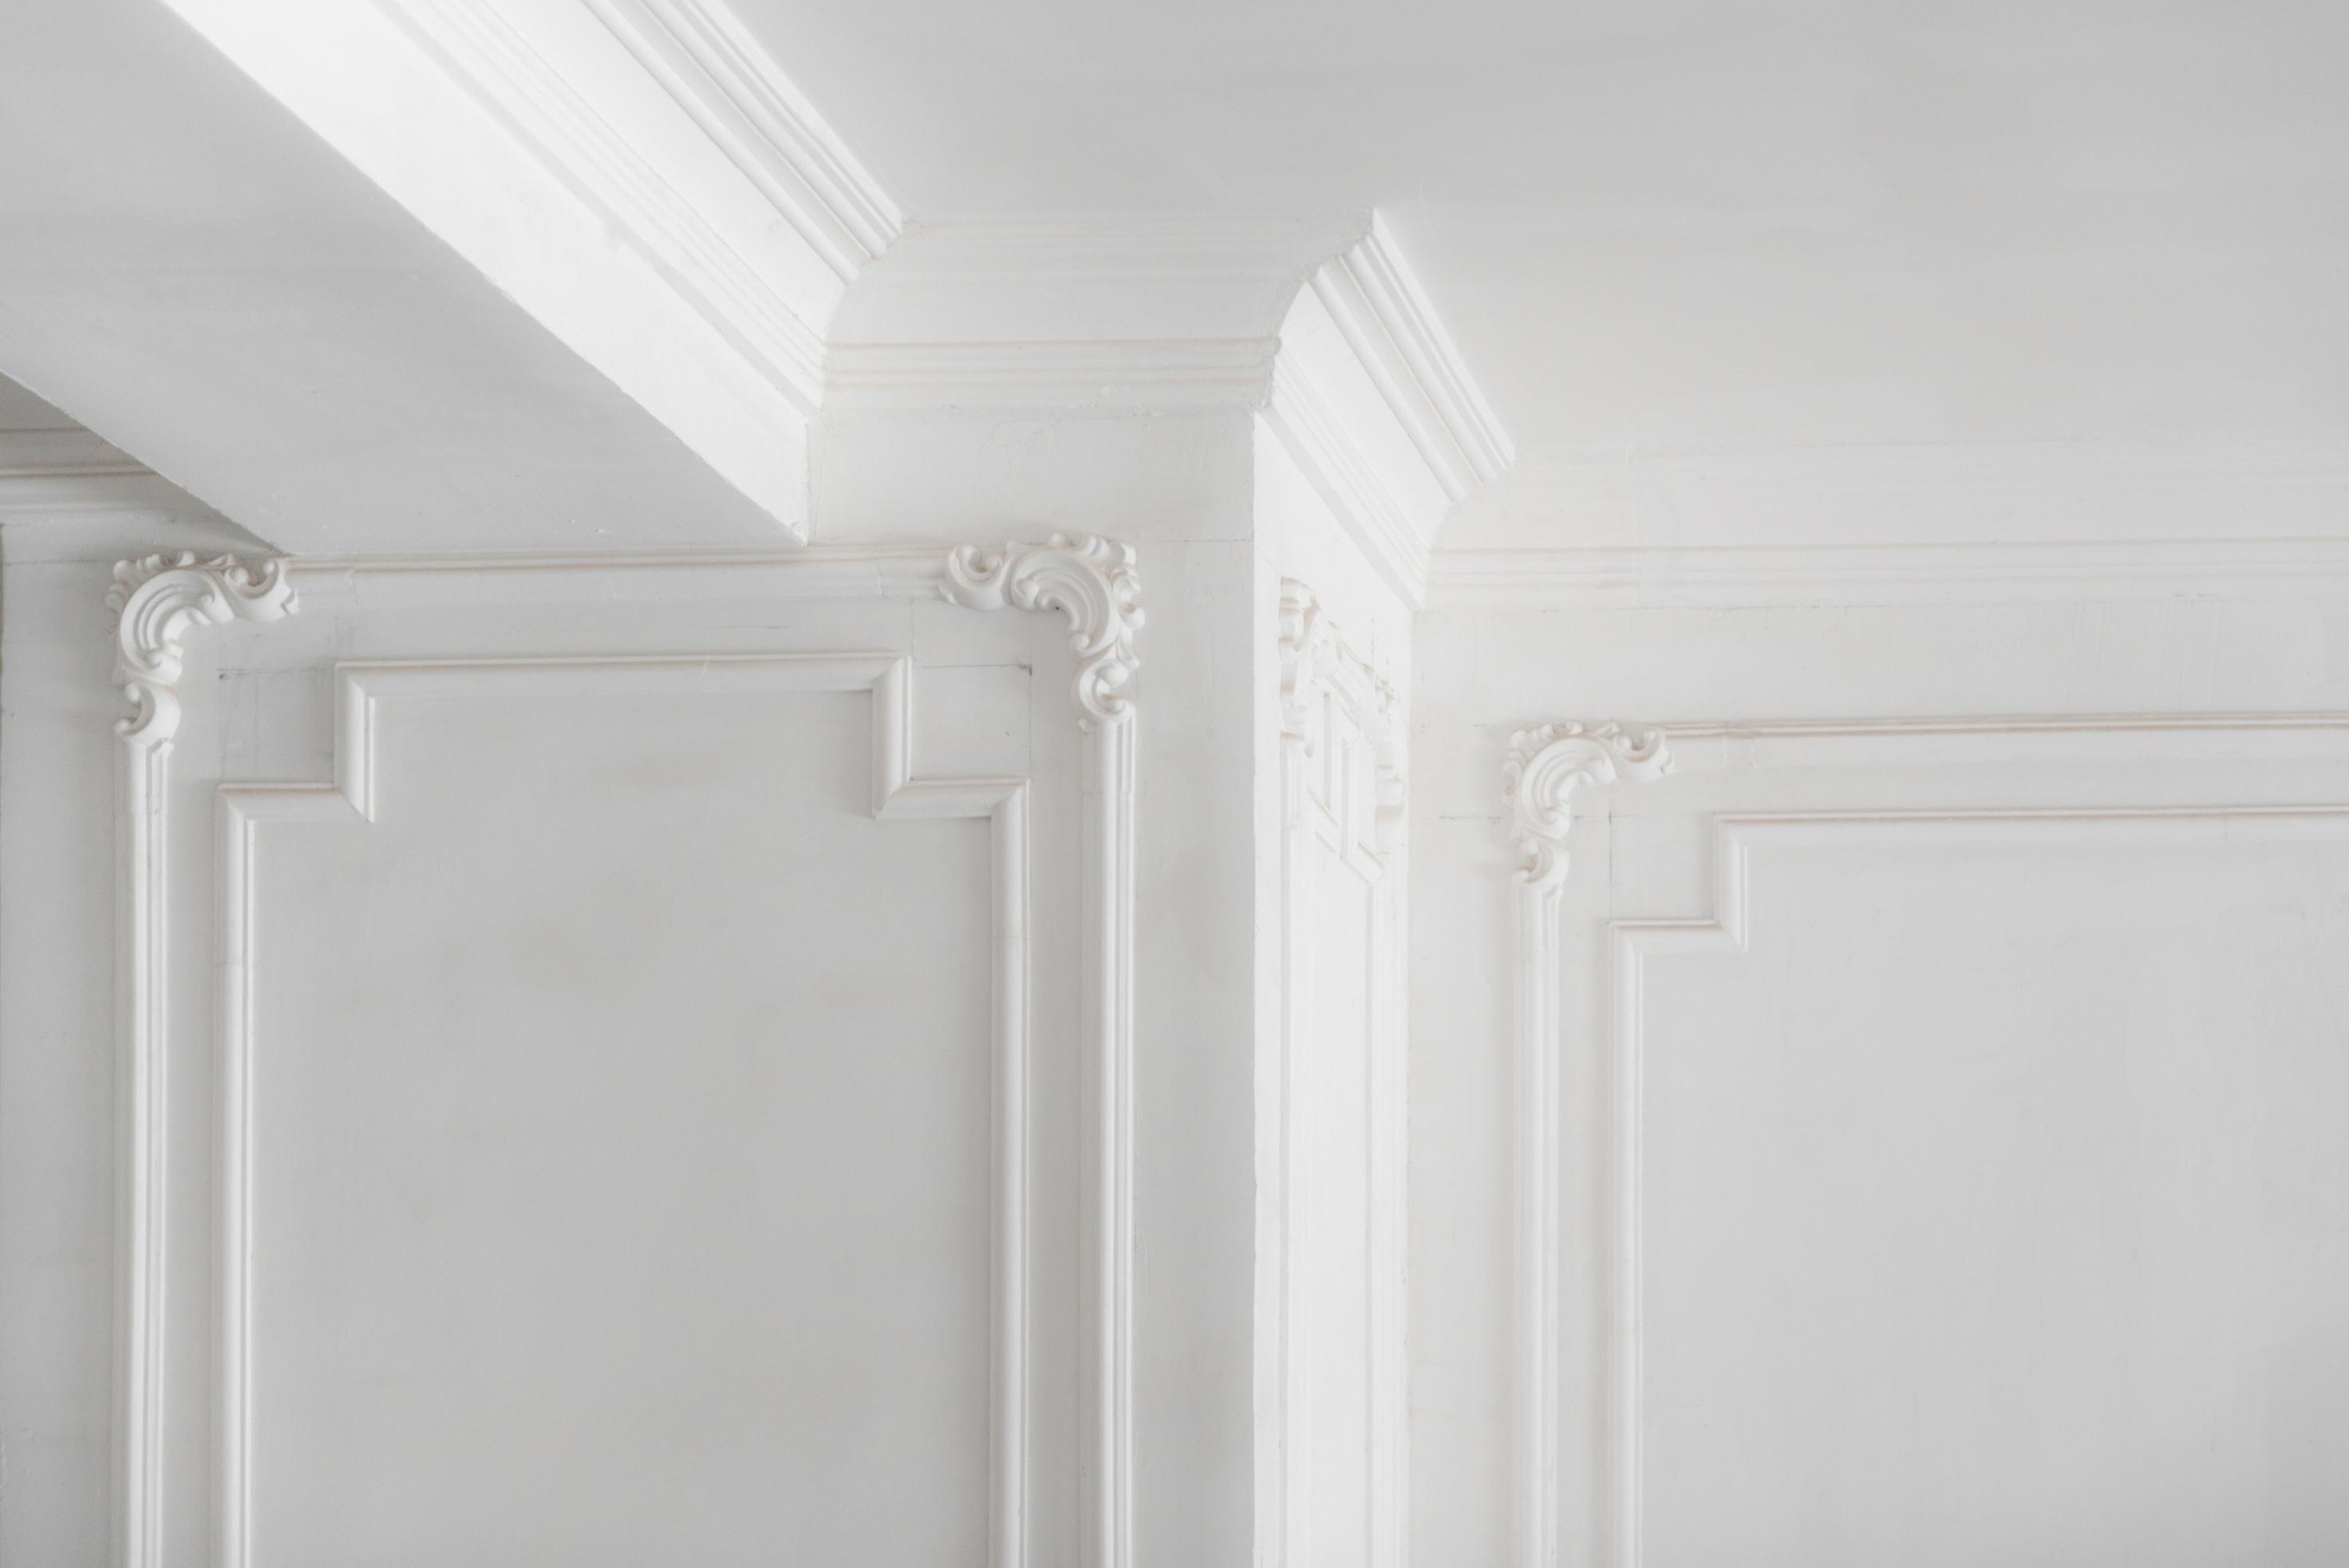 Plaster Molding in the Room